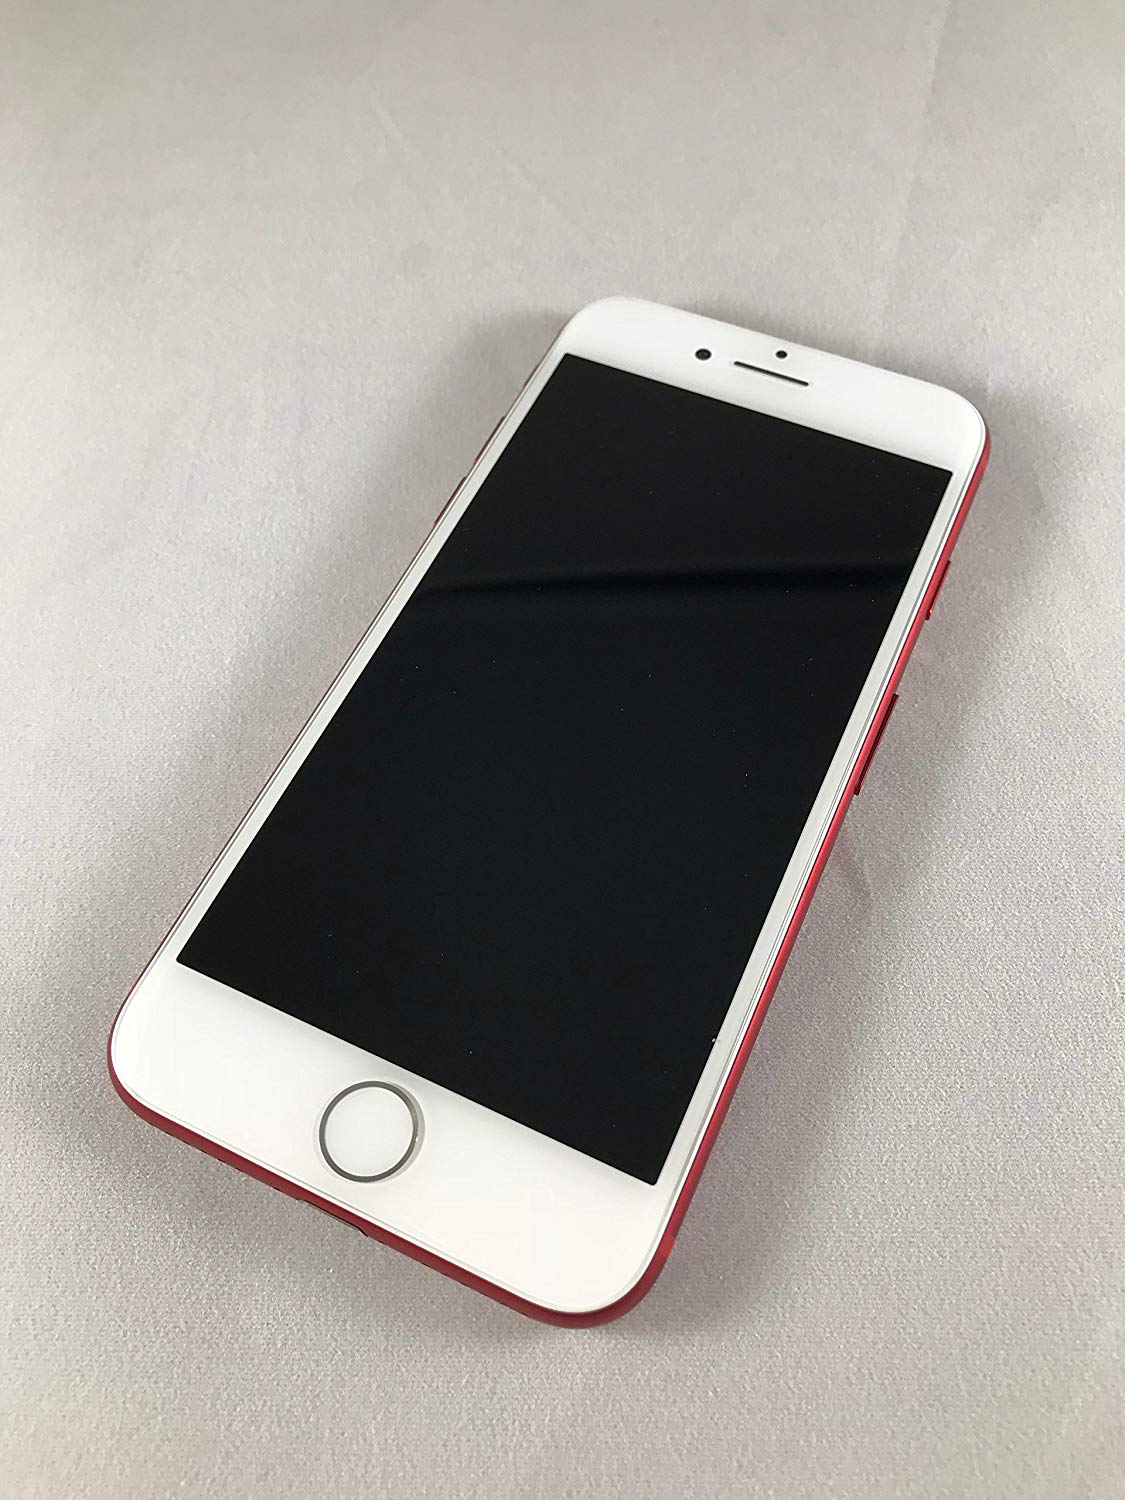 Apple iPhone 7 T-Mobile 256 GB (Red) Locked to T-Mobile - BIG nano